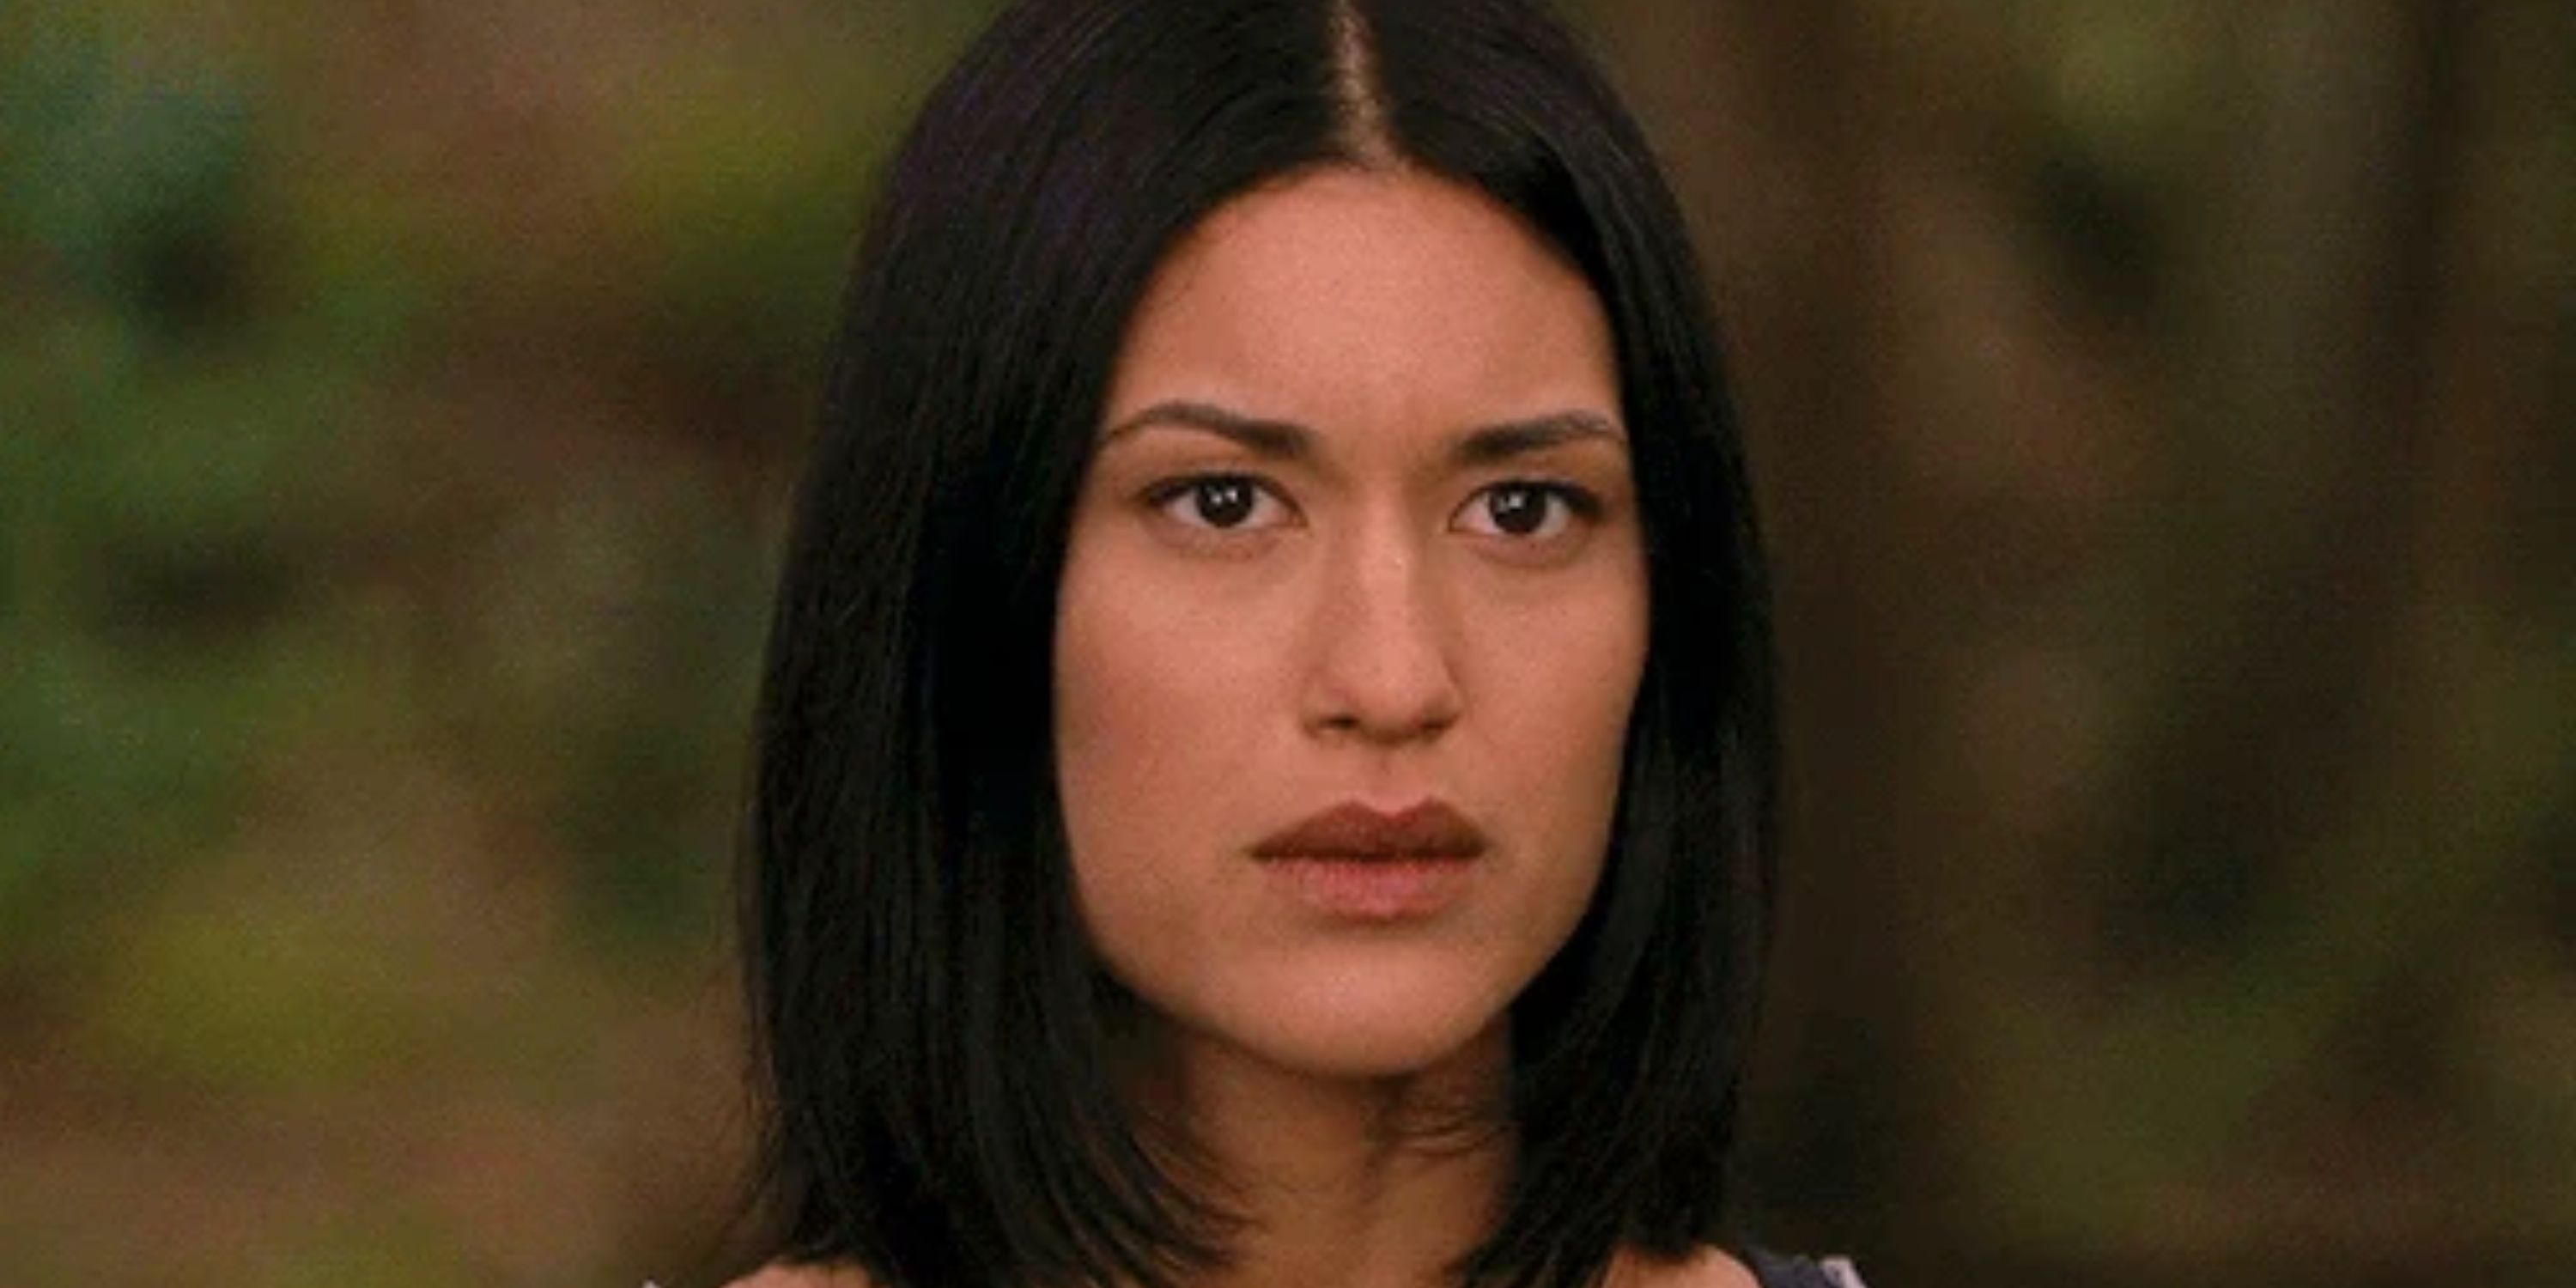 Close up of Leah Clearwater from The Twilight Saga.